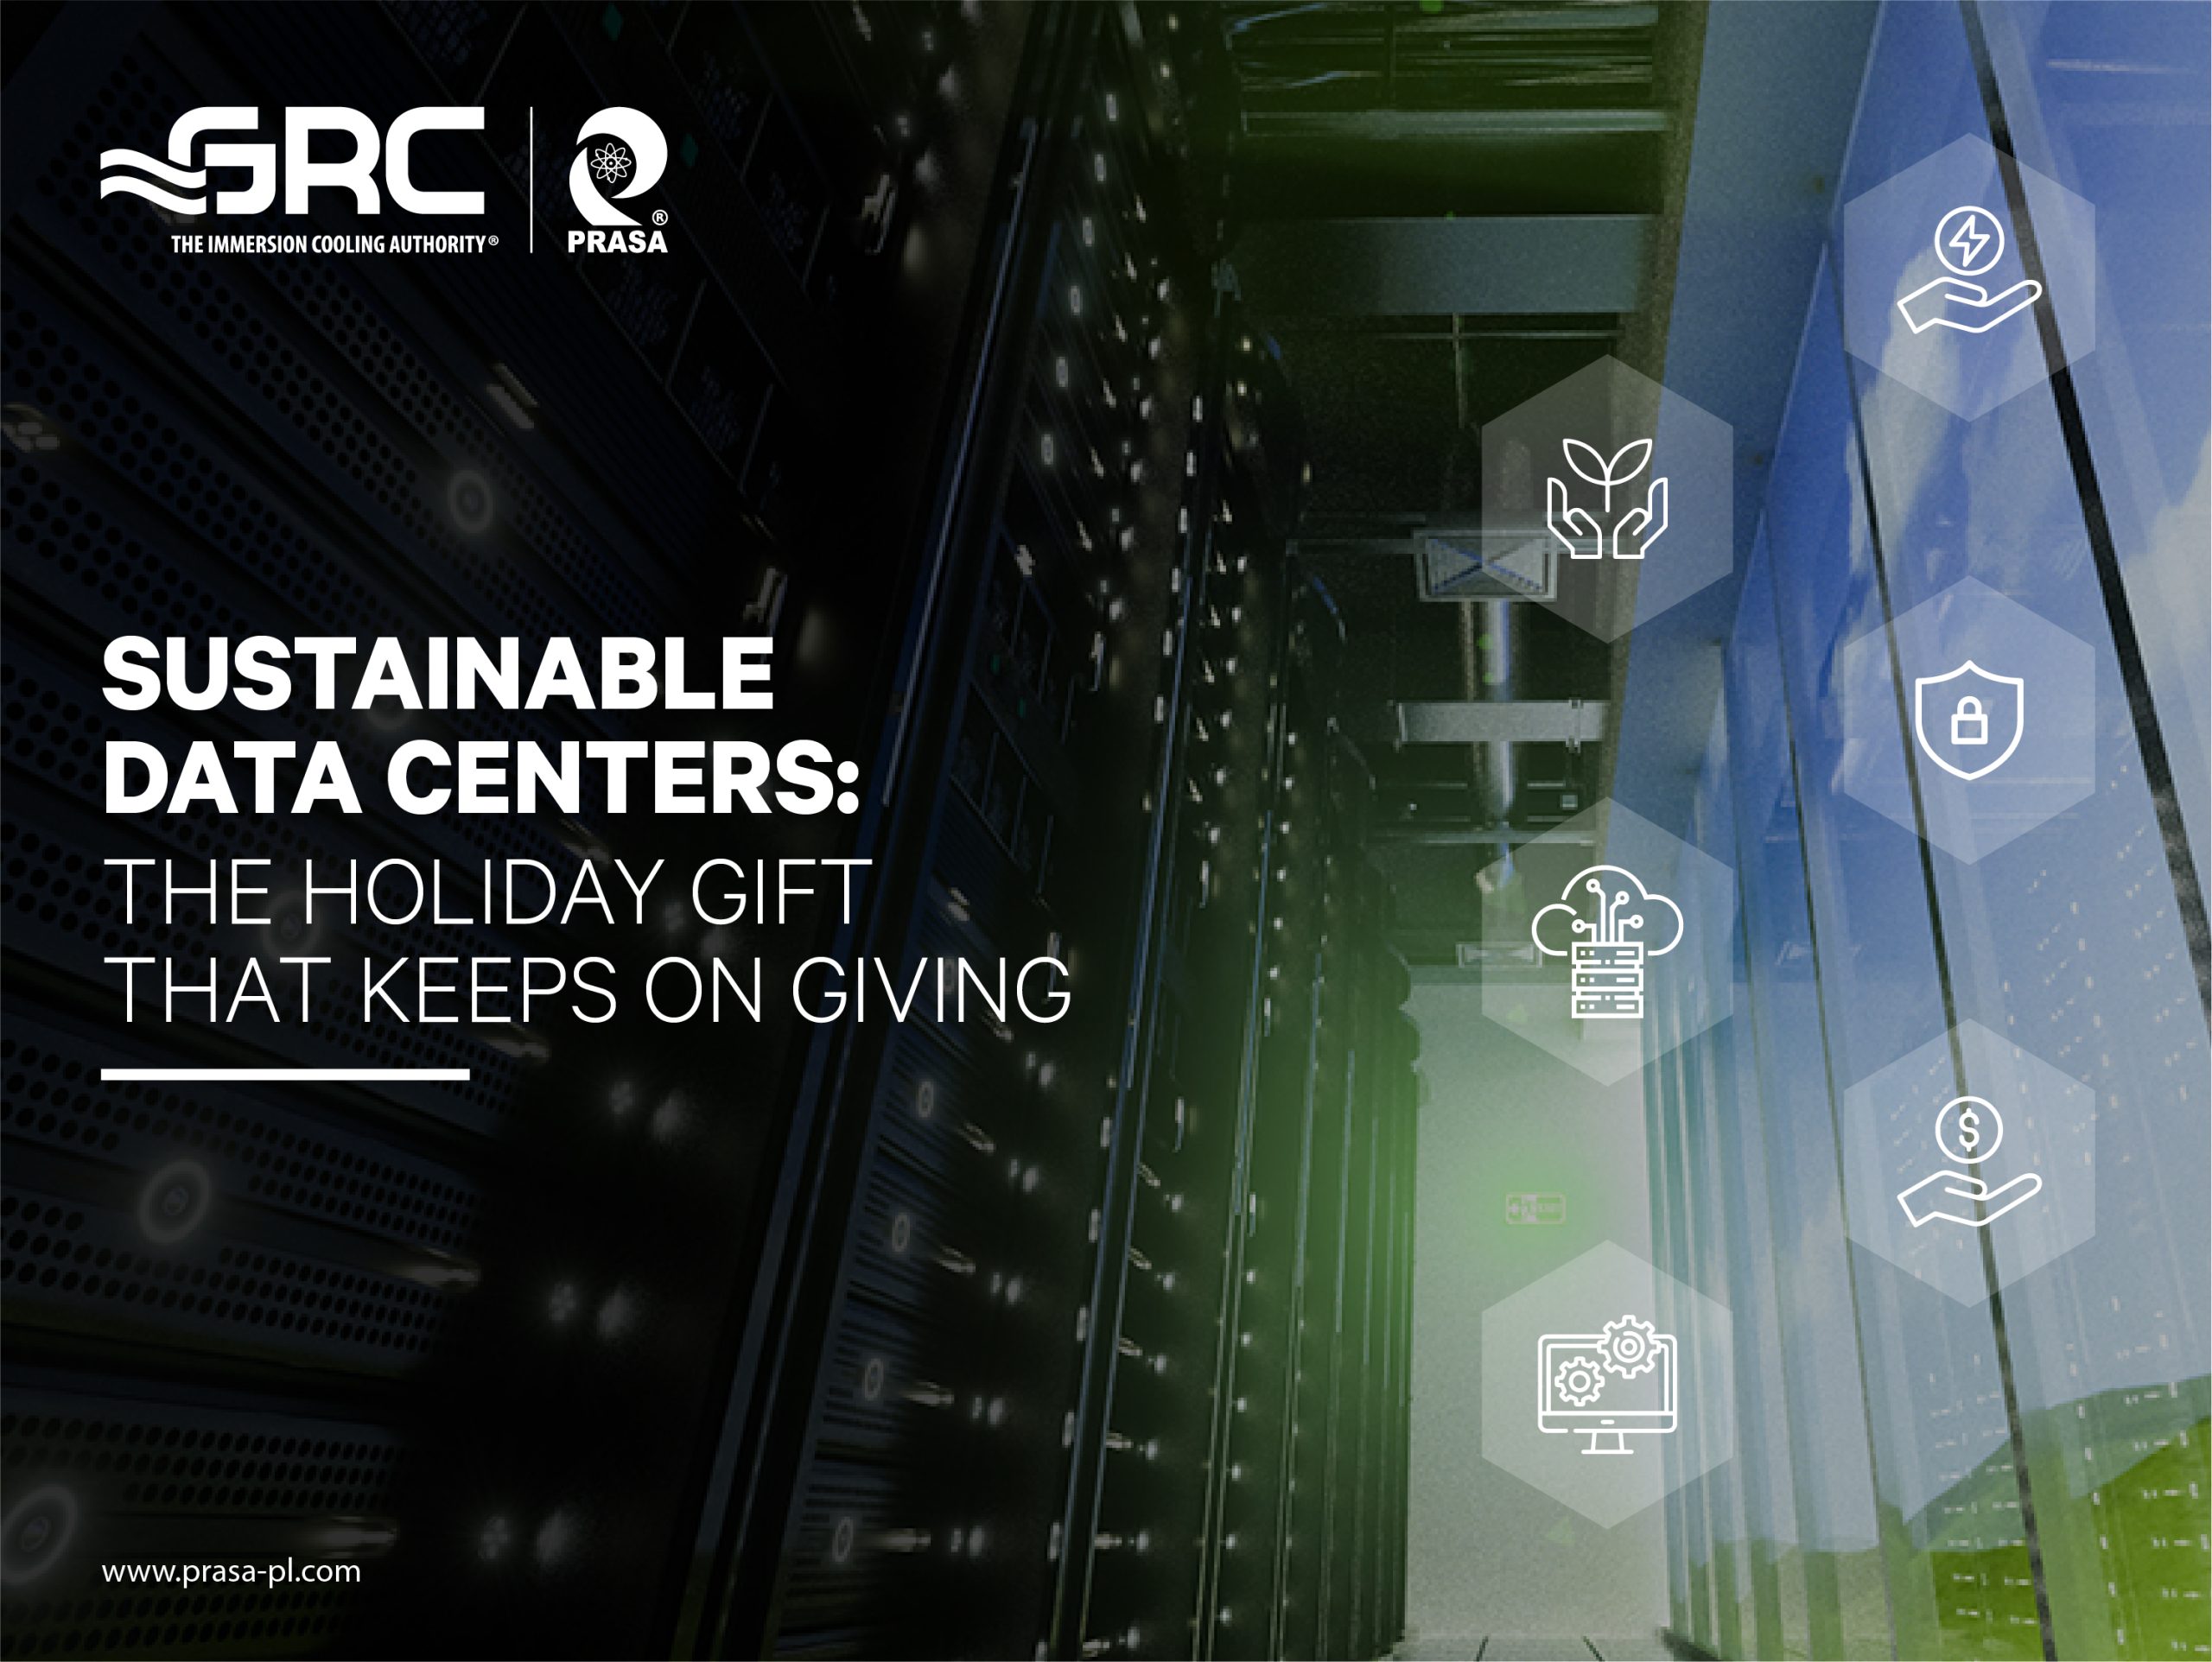 <strong>Sustainable Data Centers: The Holiday Gift That Keeps on Giving</strong>